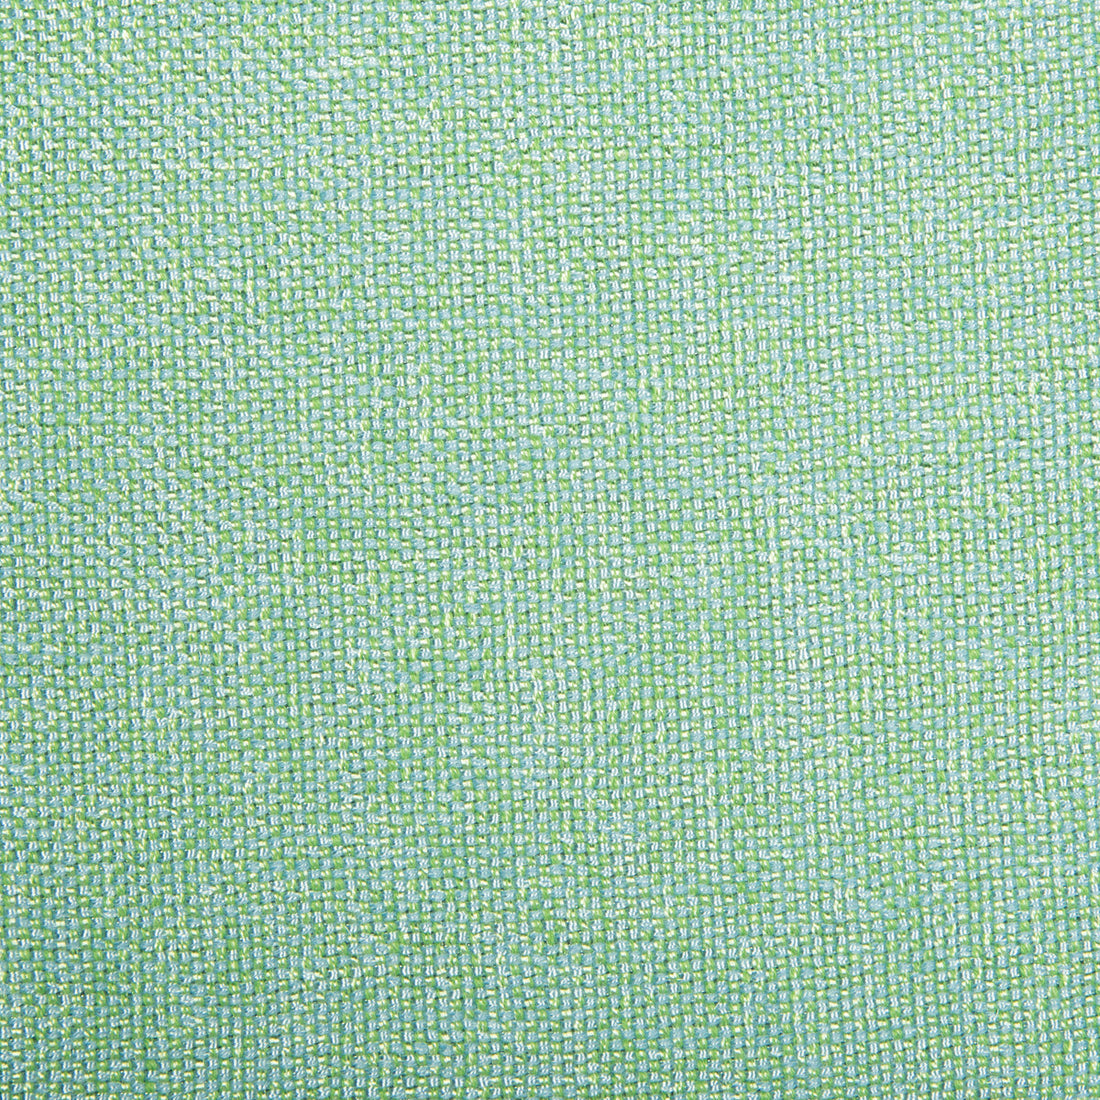 Kravet Contract fabric in 4458-1523 color - pattern 4458.1523.0 - by Kravet Contract